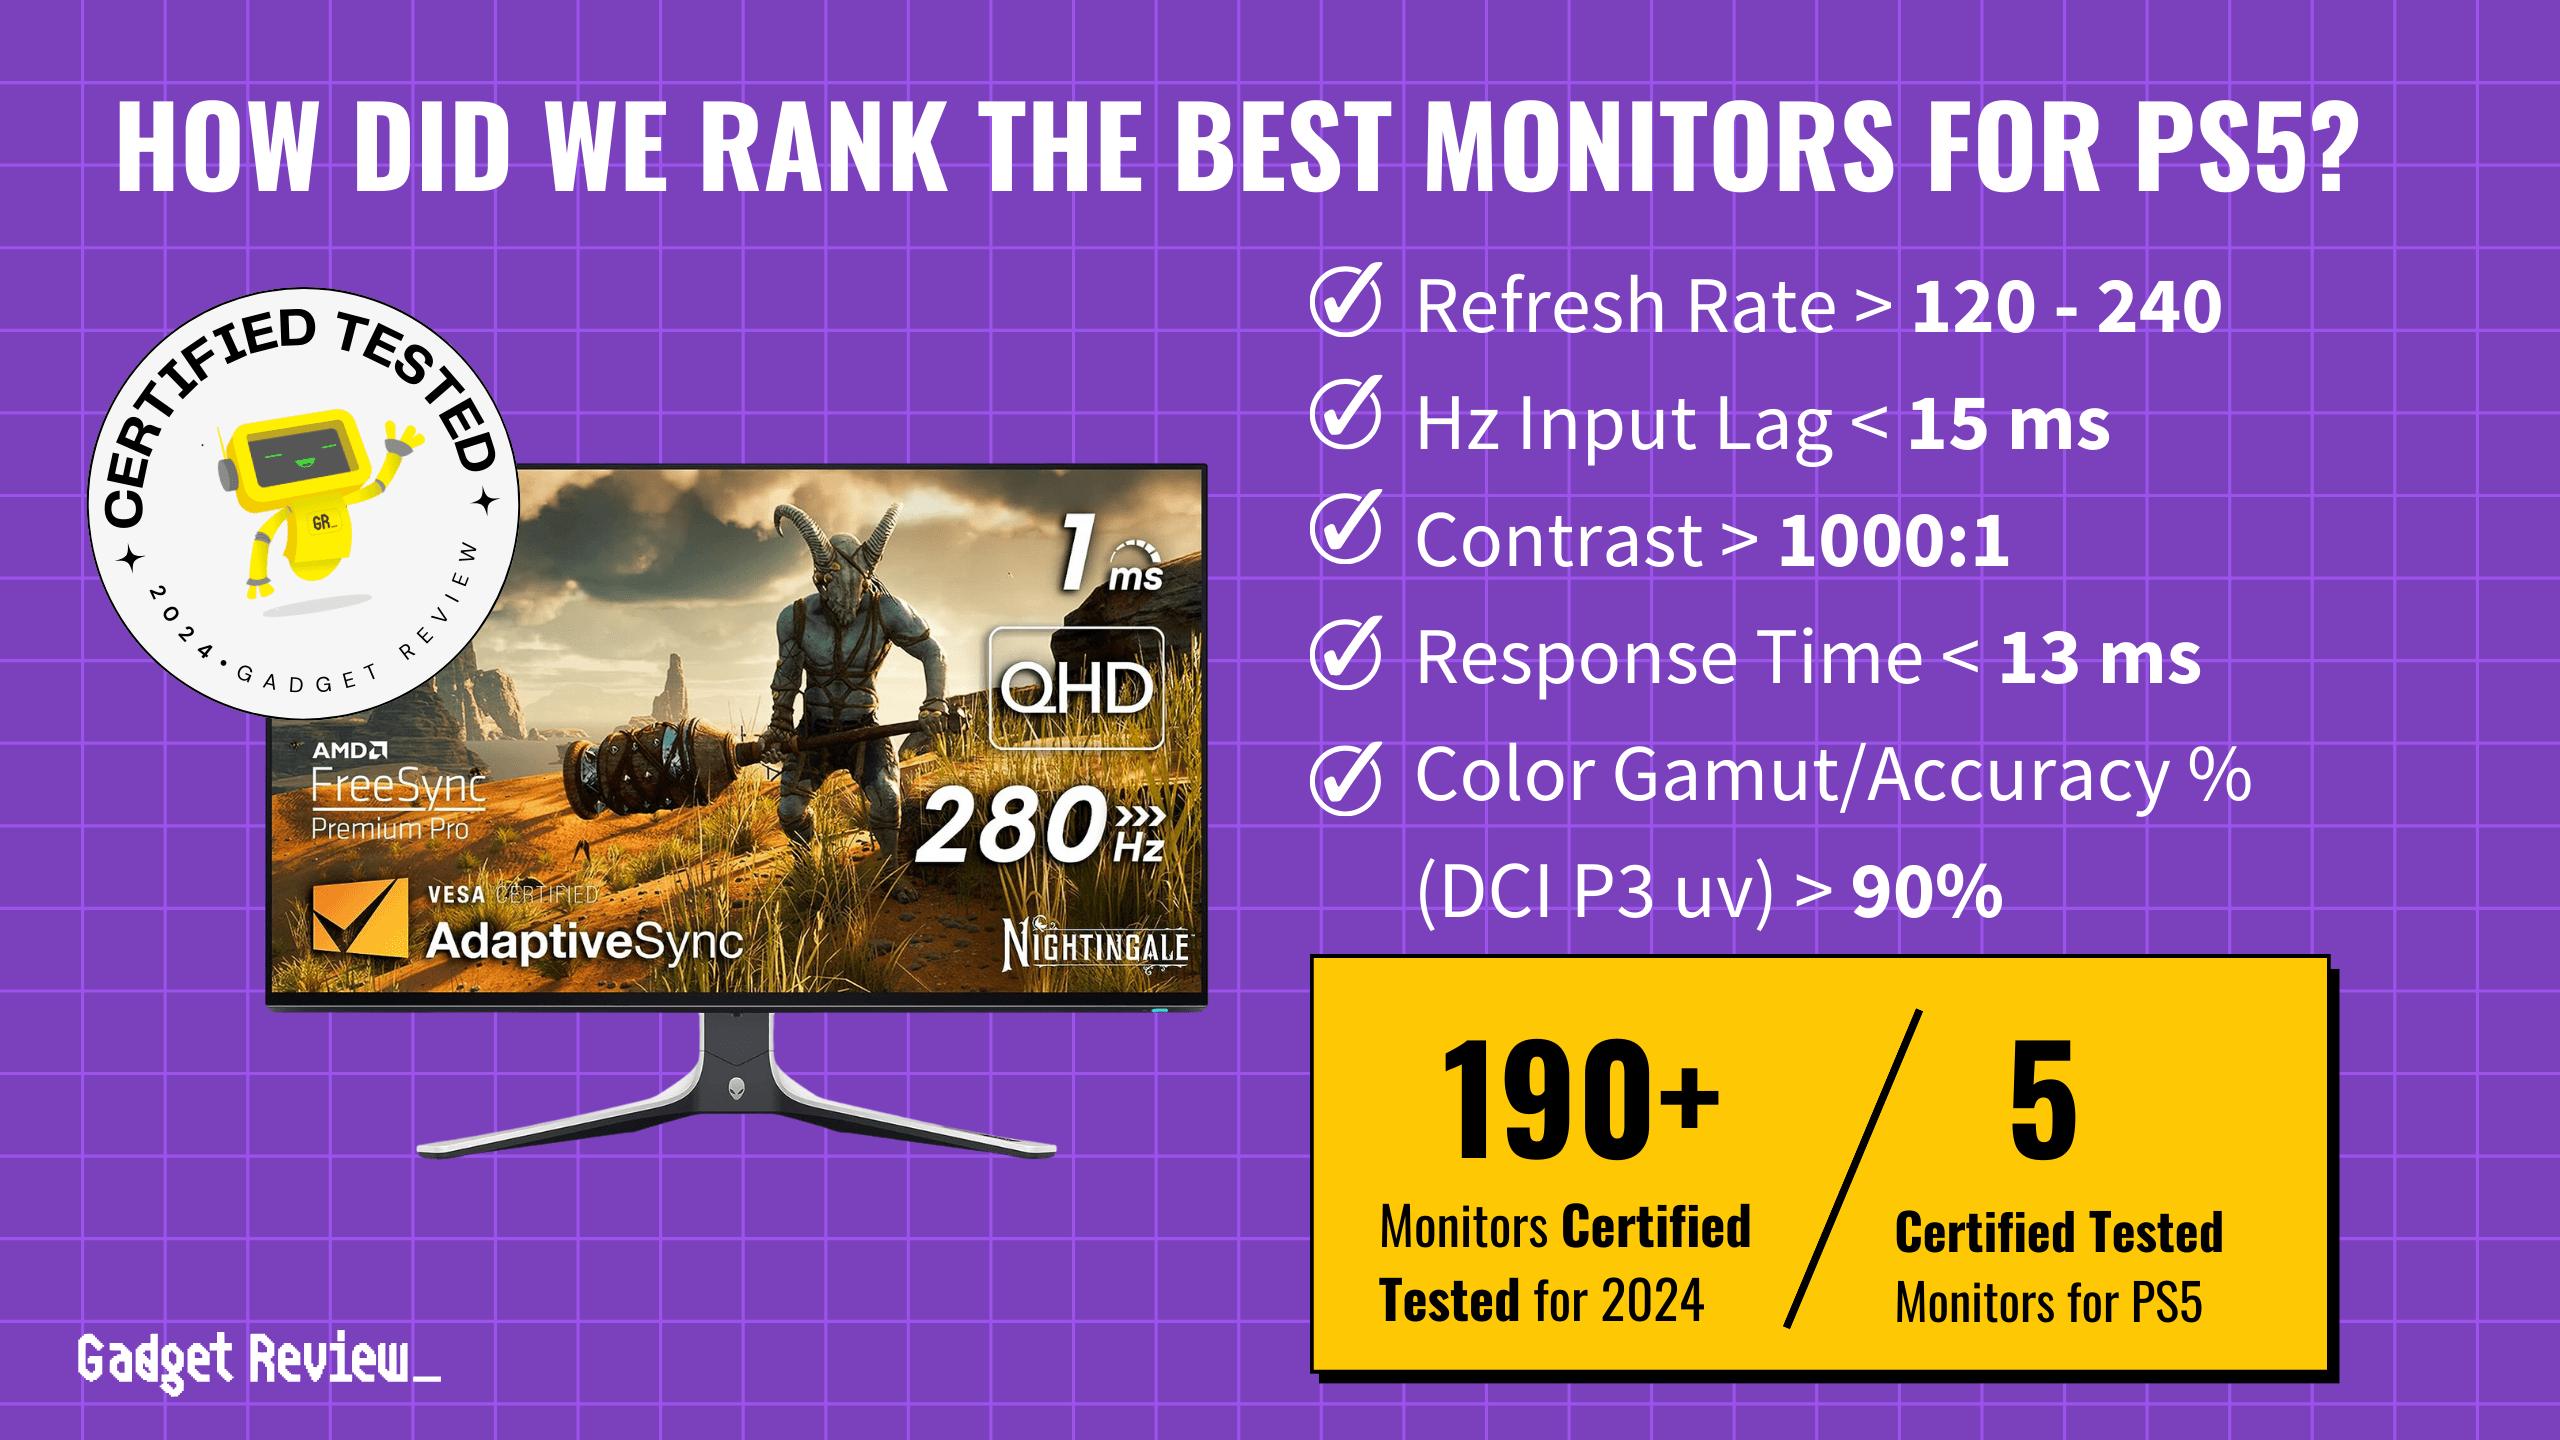 best monitor for ps5 guide that shows the top best gaming monitor model